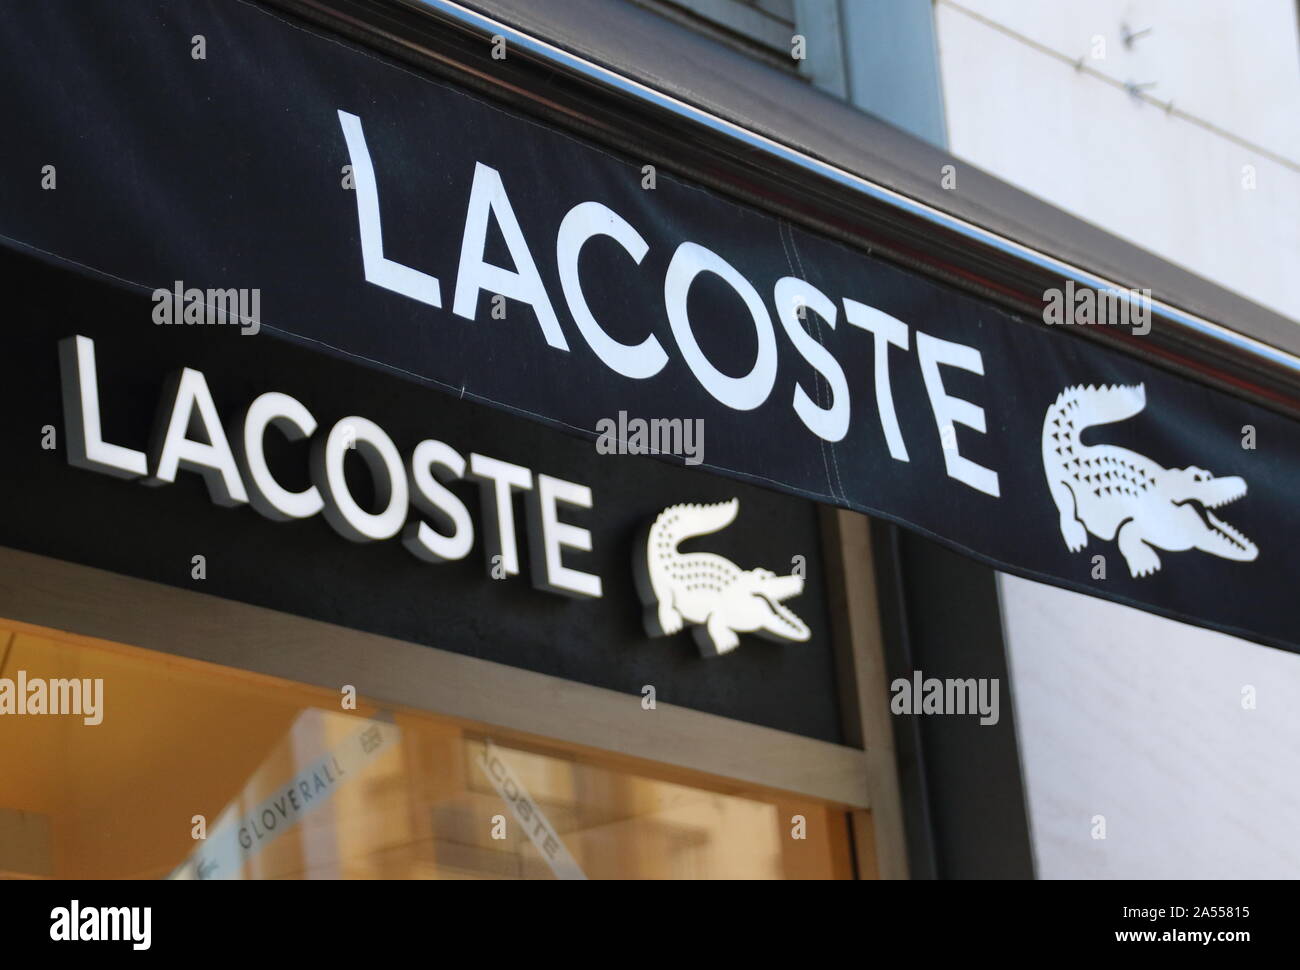 Lacoste store seen in Barcelona Stock Photo - Alamy